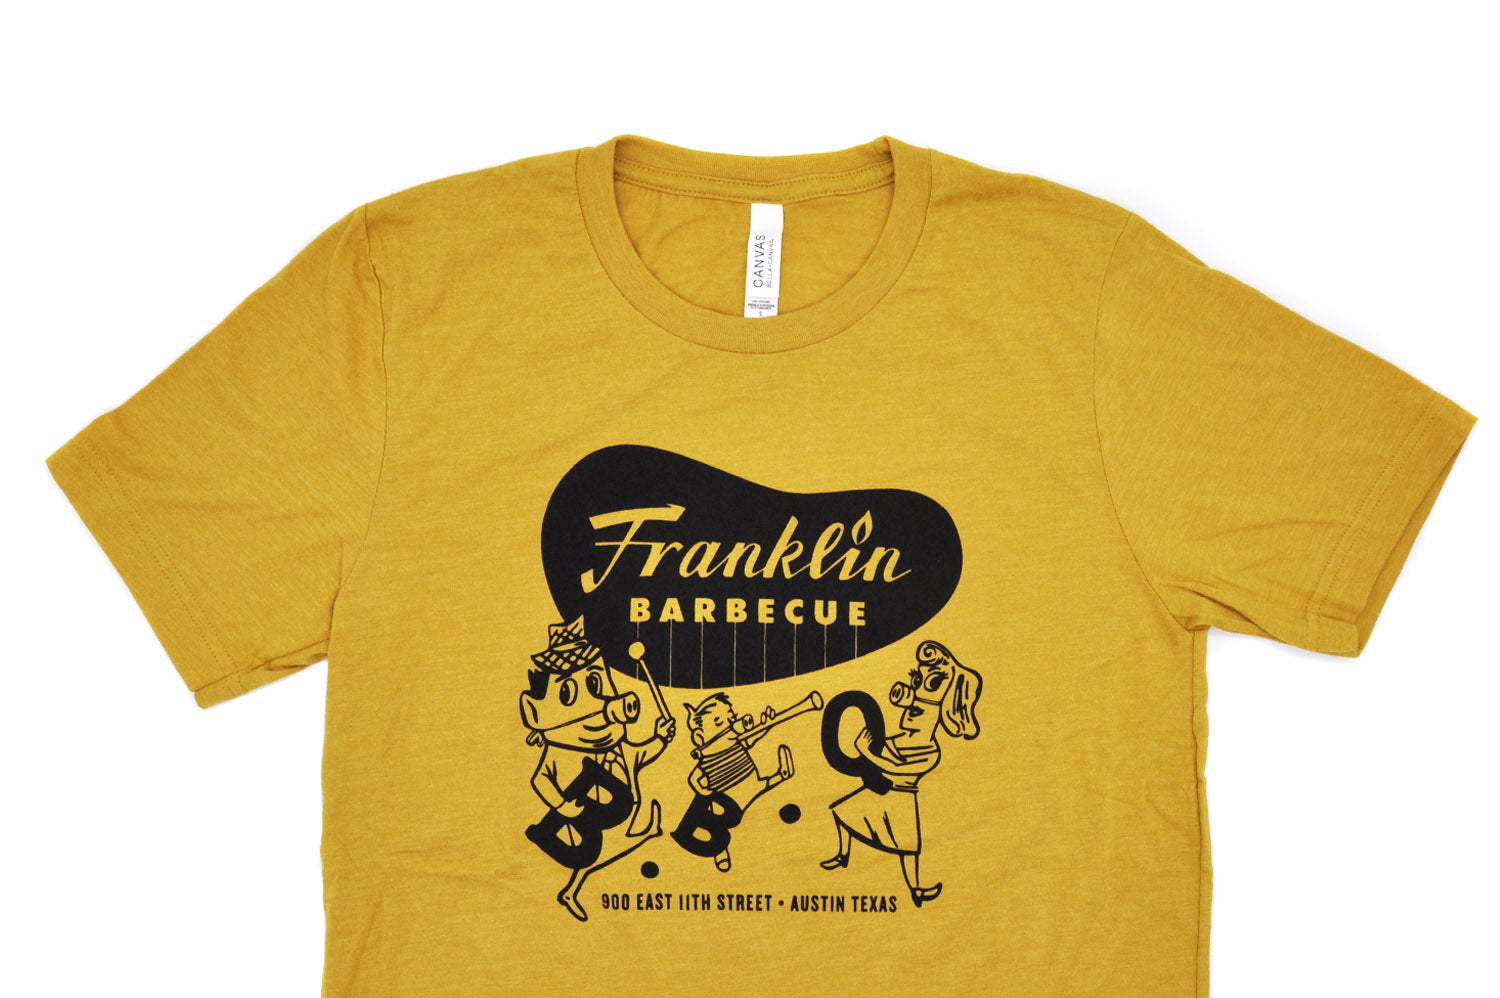 Alternate view of heather yellow Franklin Barbecue t-shirt.